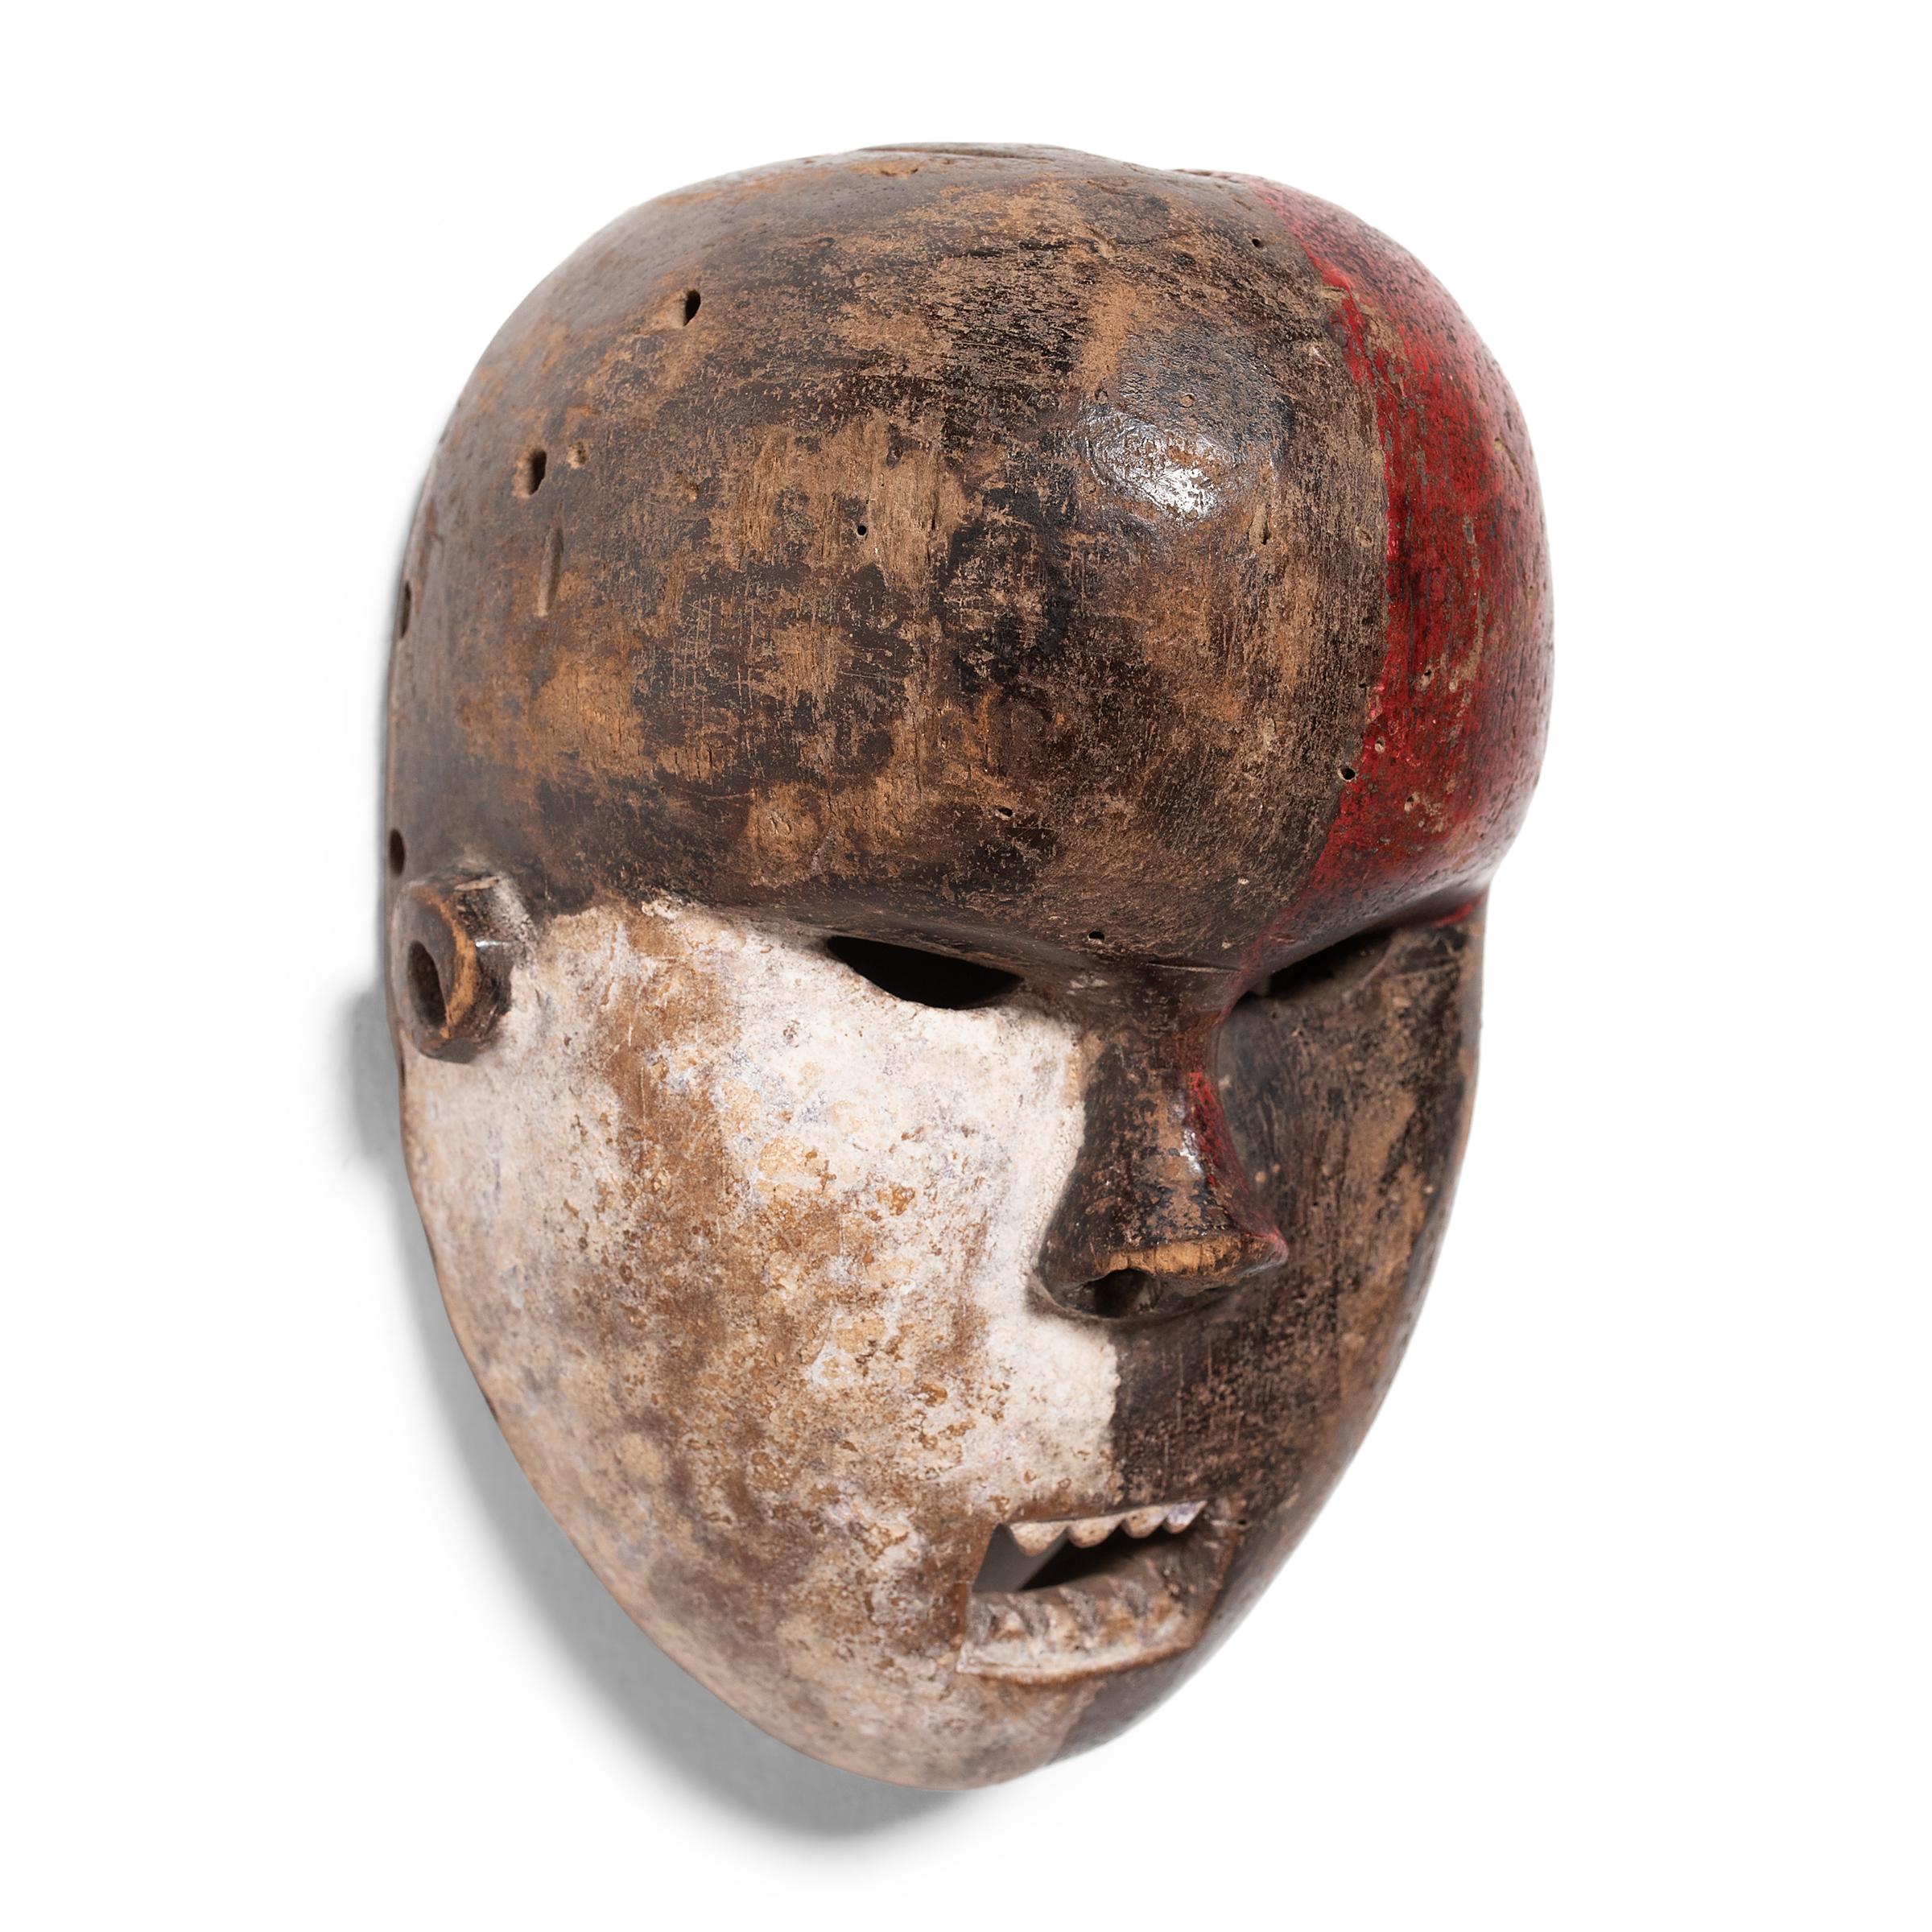 Divided into contrasting tones, this ceremonial African mask is linked to the Salampasu people of the Bantu ethnic group located primarily in the Democratic Republic of Congo. Salampasu masks were an integral part of the men's warrior society whose